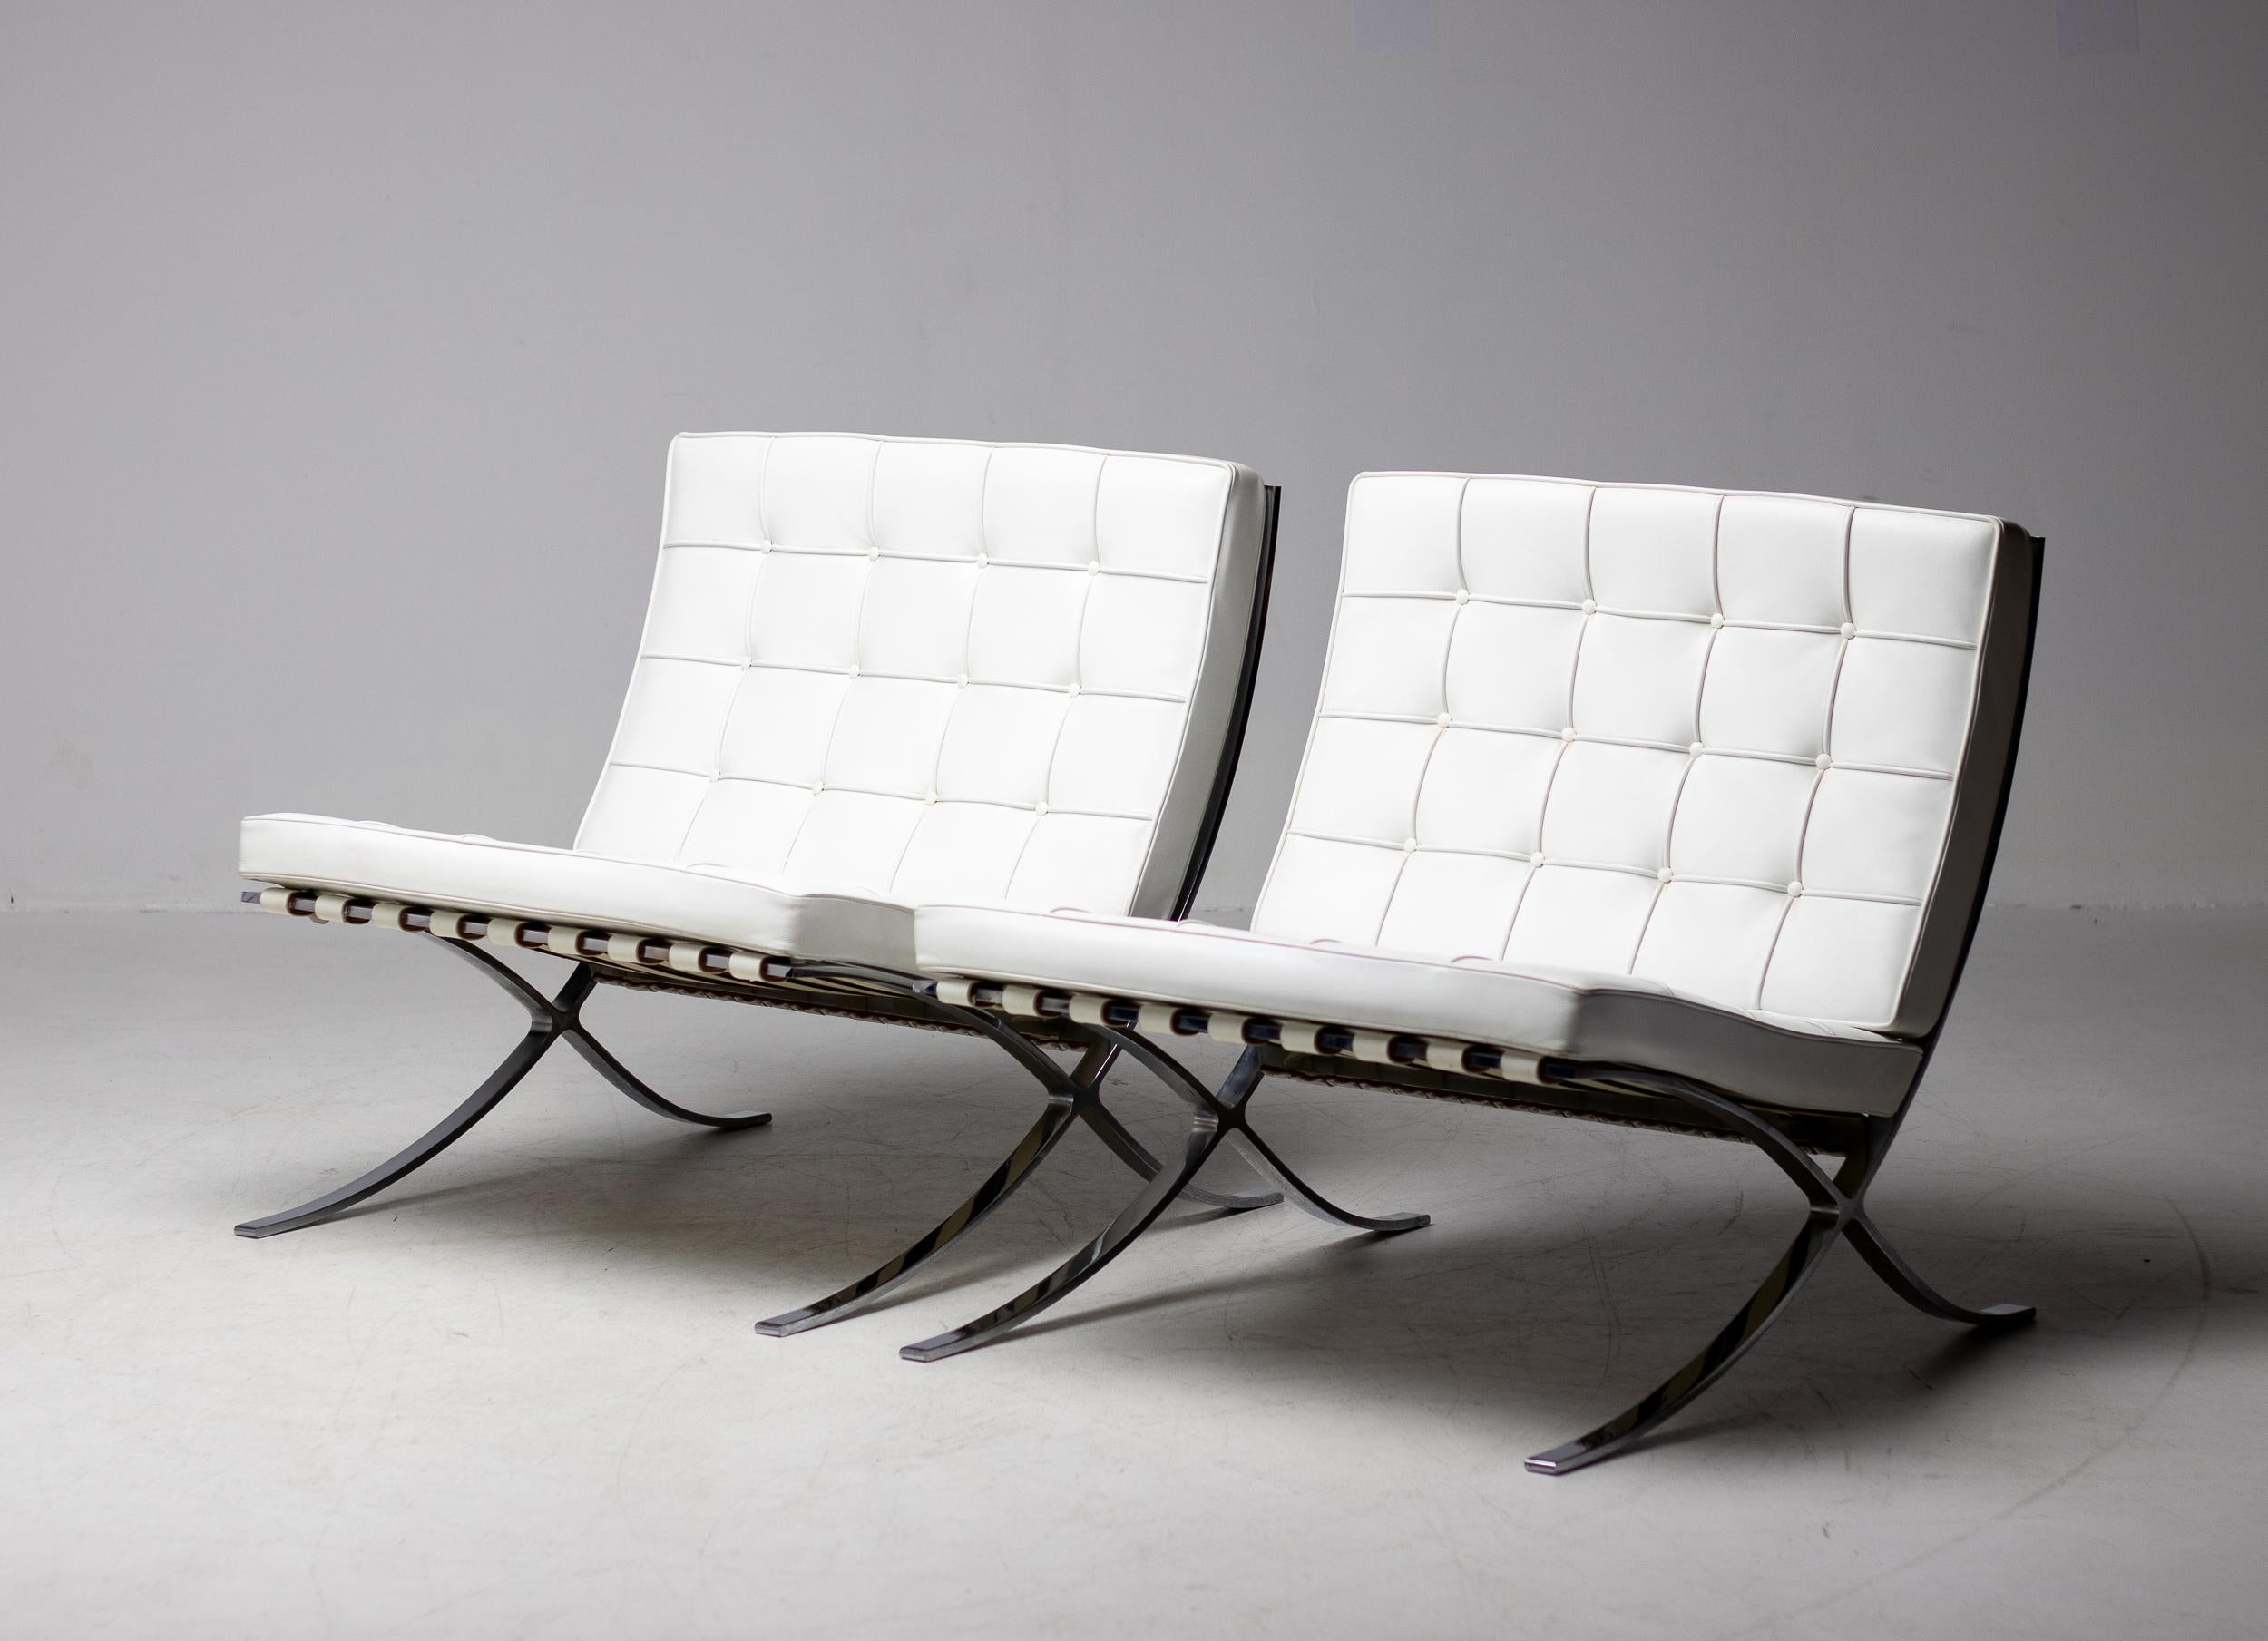 This pair of gorgeous white leather 'Barcelona' lounge chairs by Ludwig Mies van der Rohe for Knoll Studios is double-signed on each piece, with Knoll on the bottom of the seat cushions and Knoll Studio embossing with Mies van der Rohe signatures